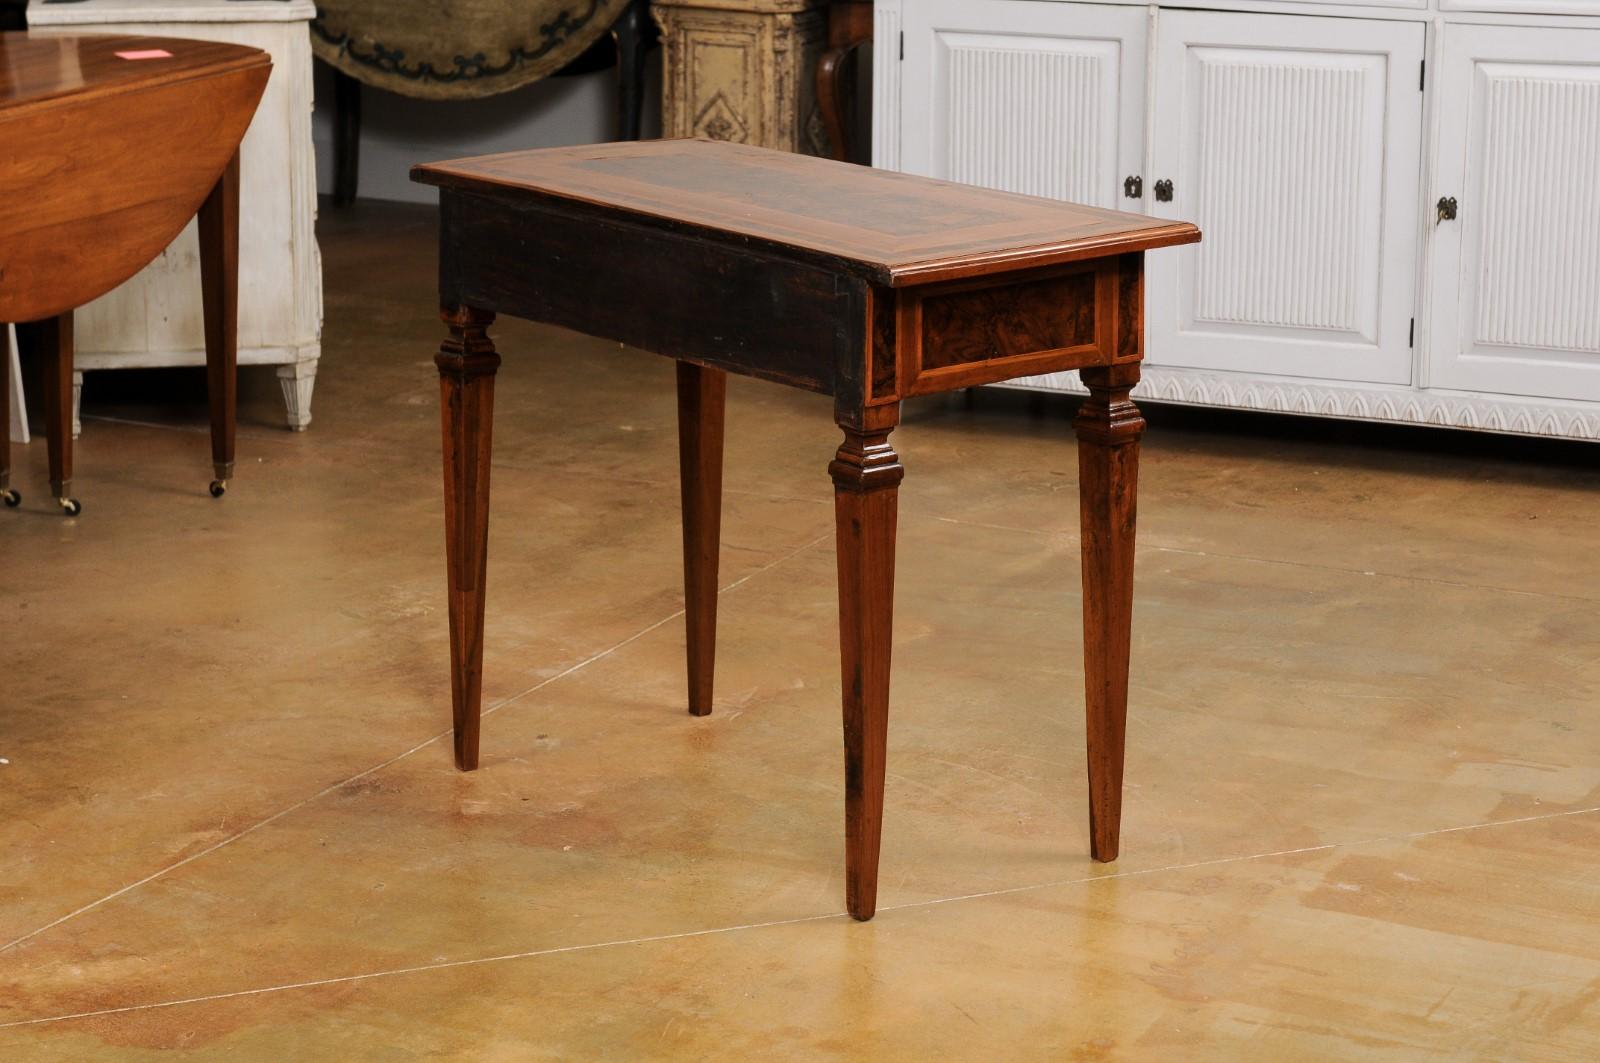 Italian Neoclassical Period 18th Century Console Table with Marquetry Décor For Sale 2